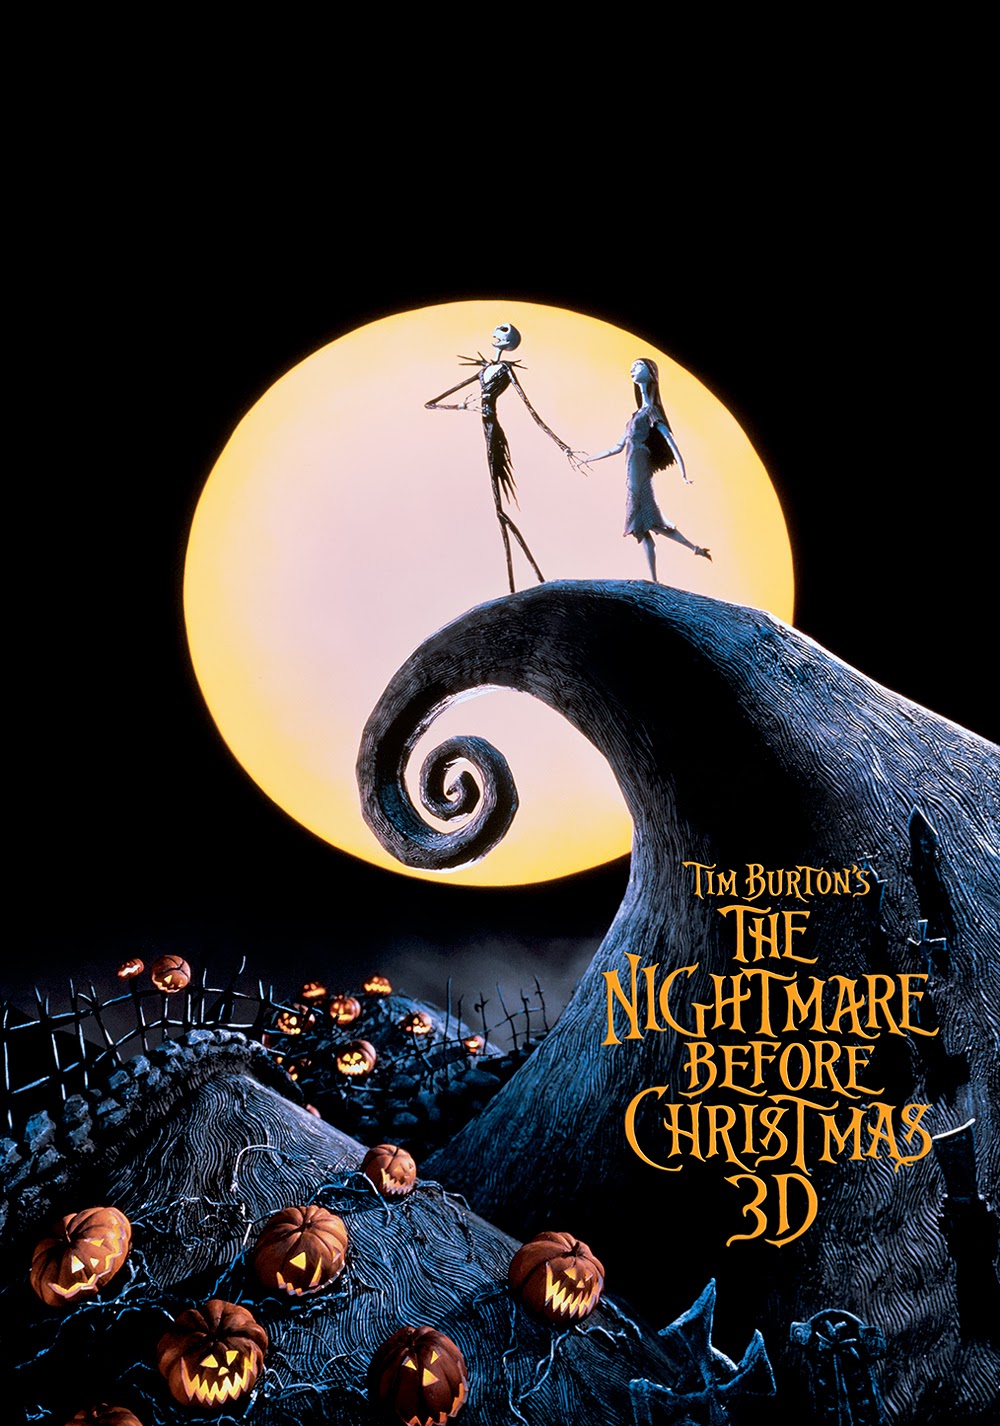 With Love -my obsession with films-: The Nightmare Before Christmas 4D ...